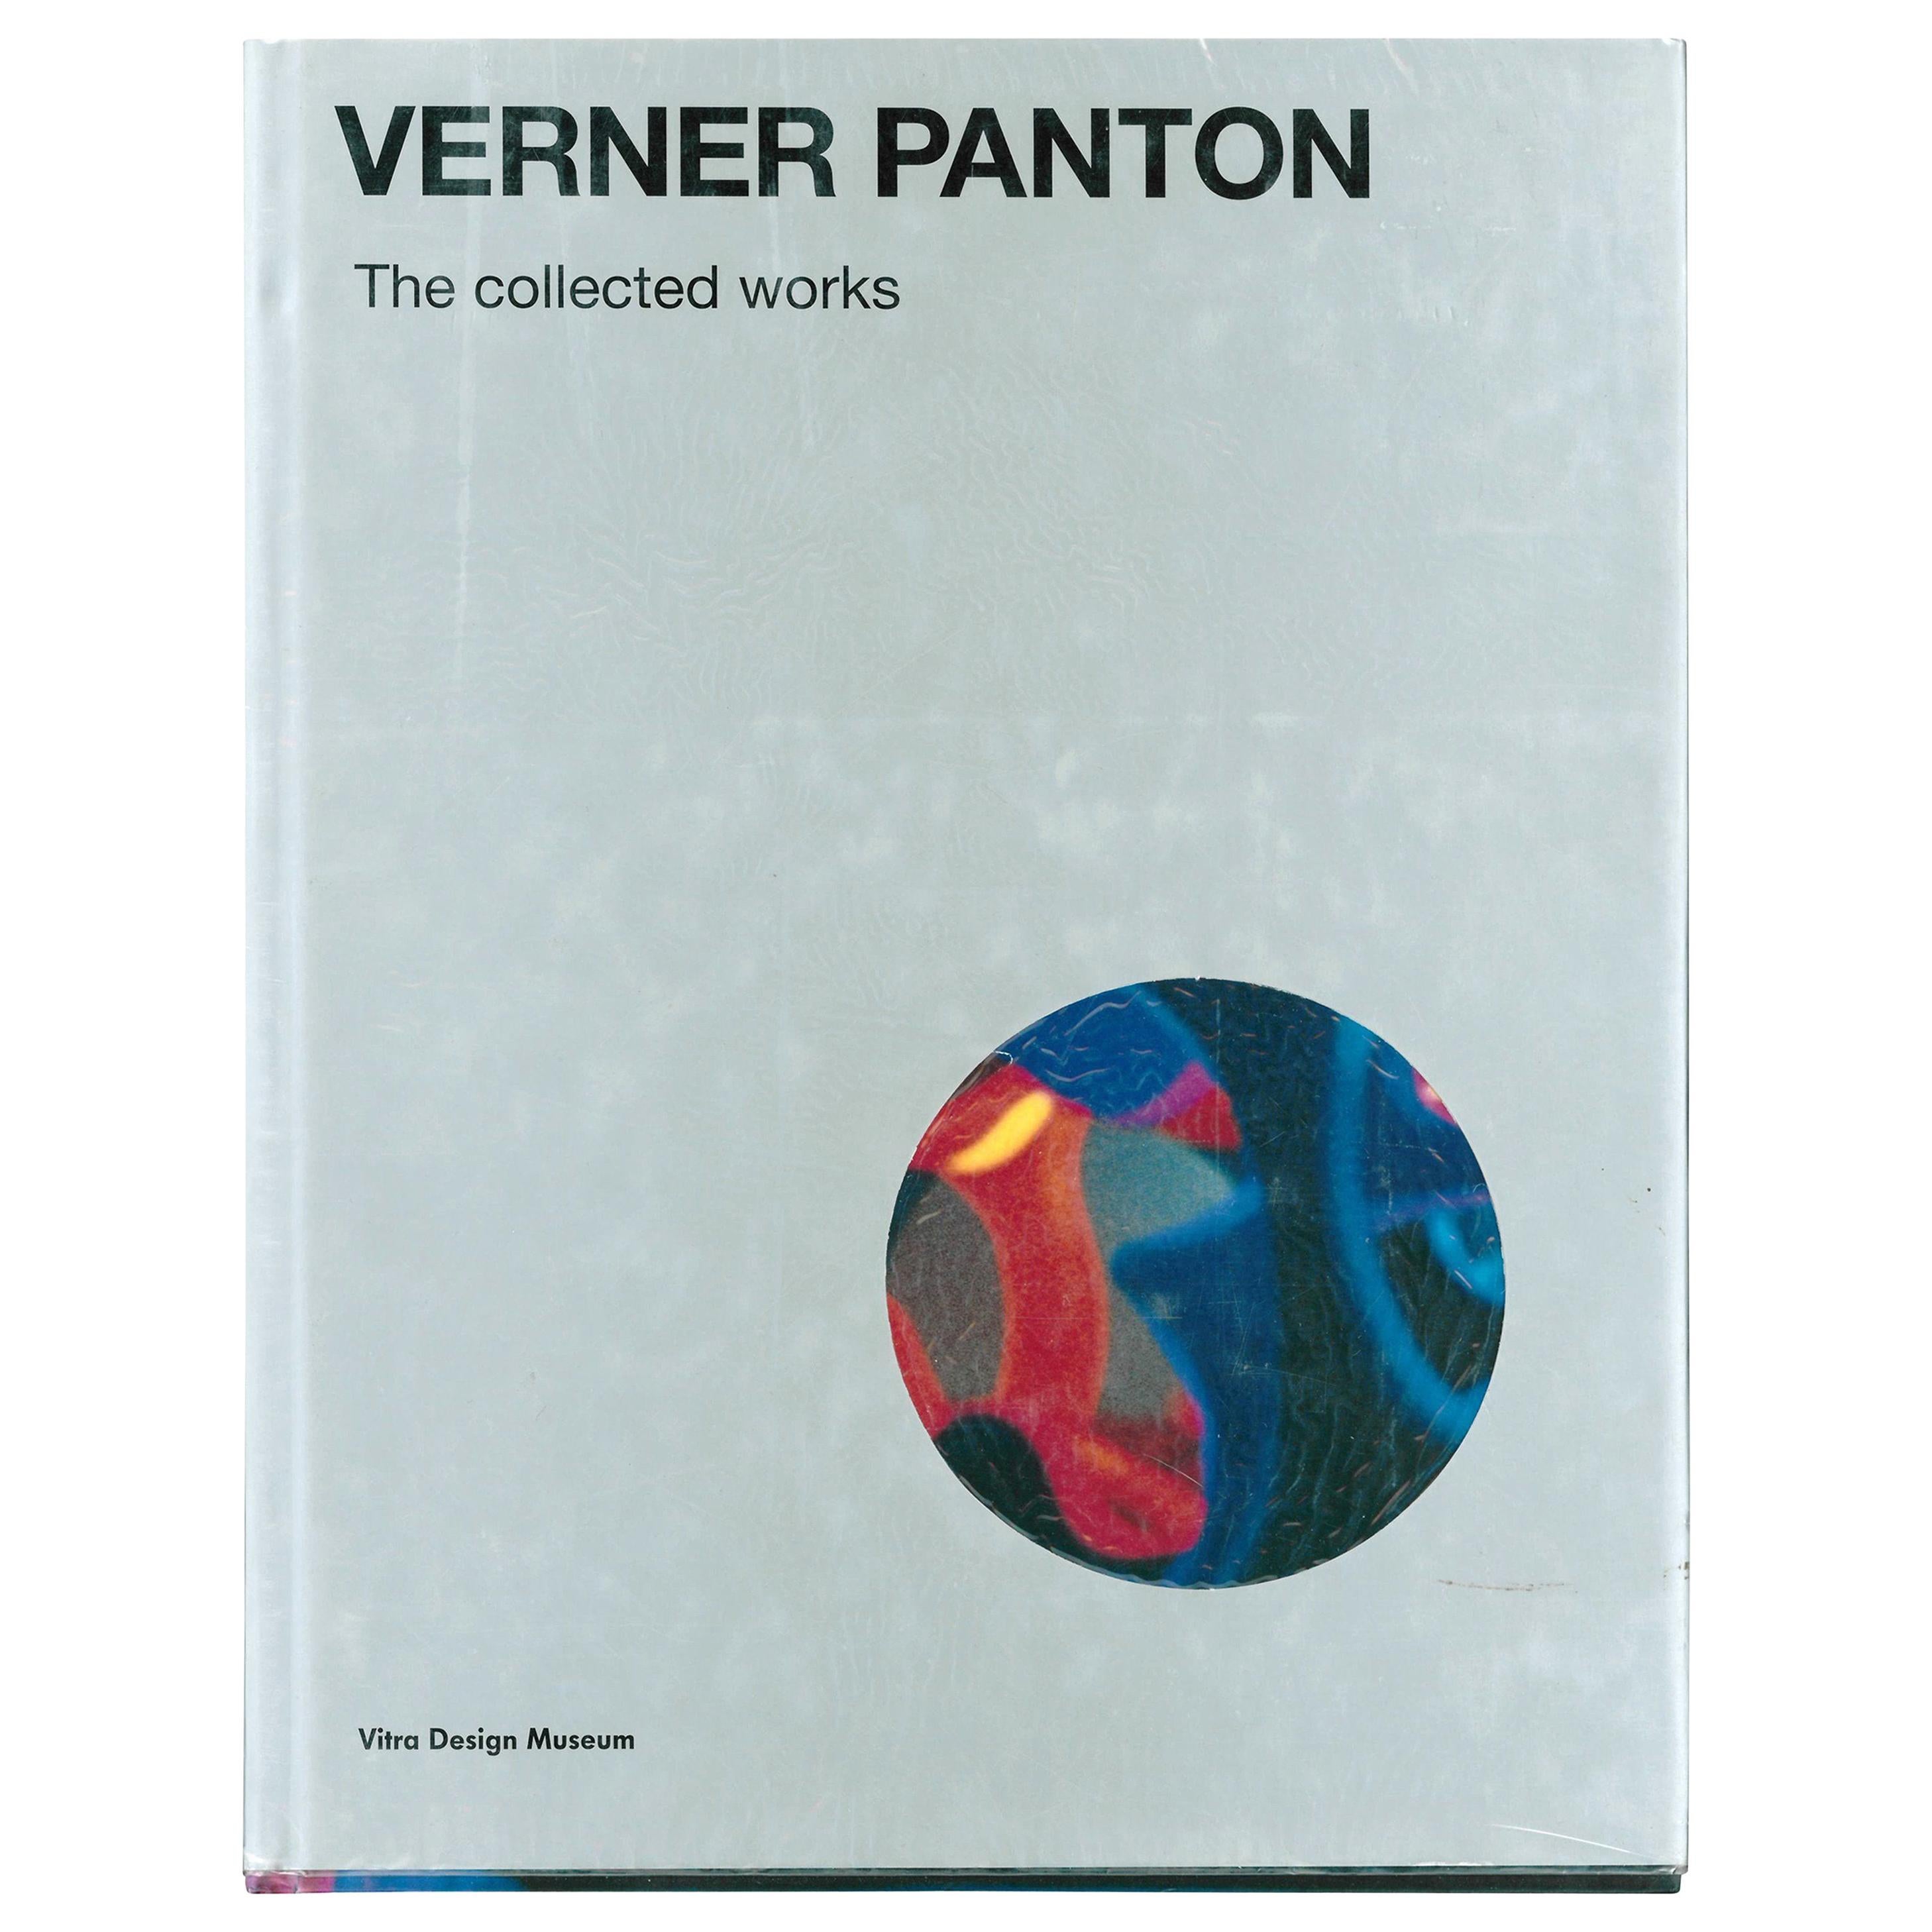 "Verner Panton, the Collected Works", Book